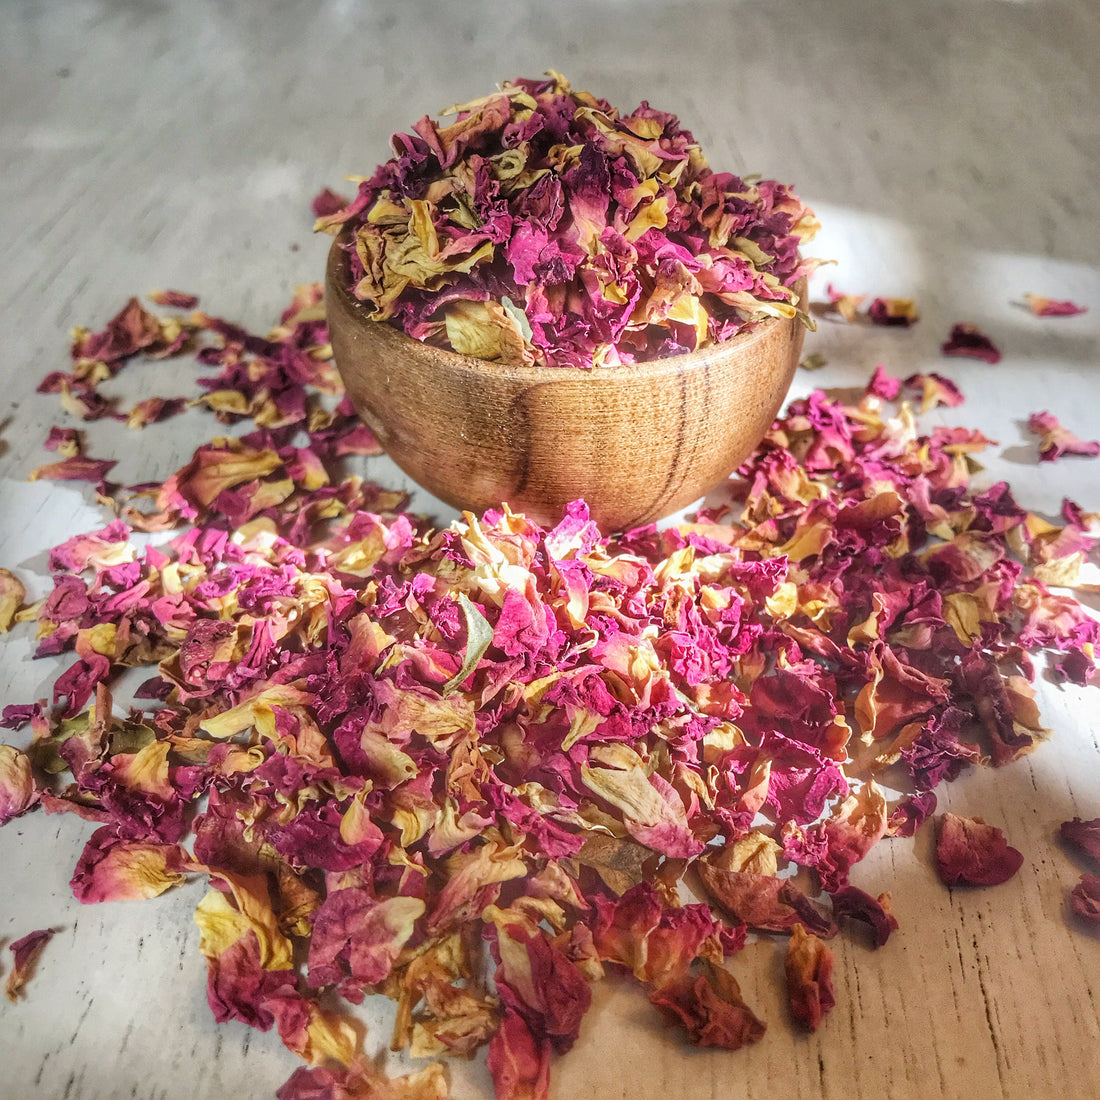 Organic dried rose petals in a natural wooden bowl, spread on a wooden surface, suitable for herbal teas and crafts.